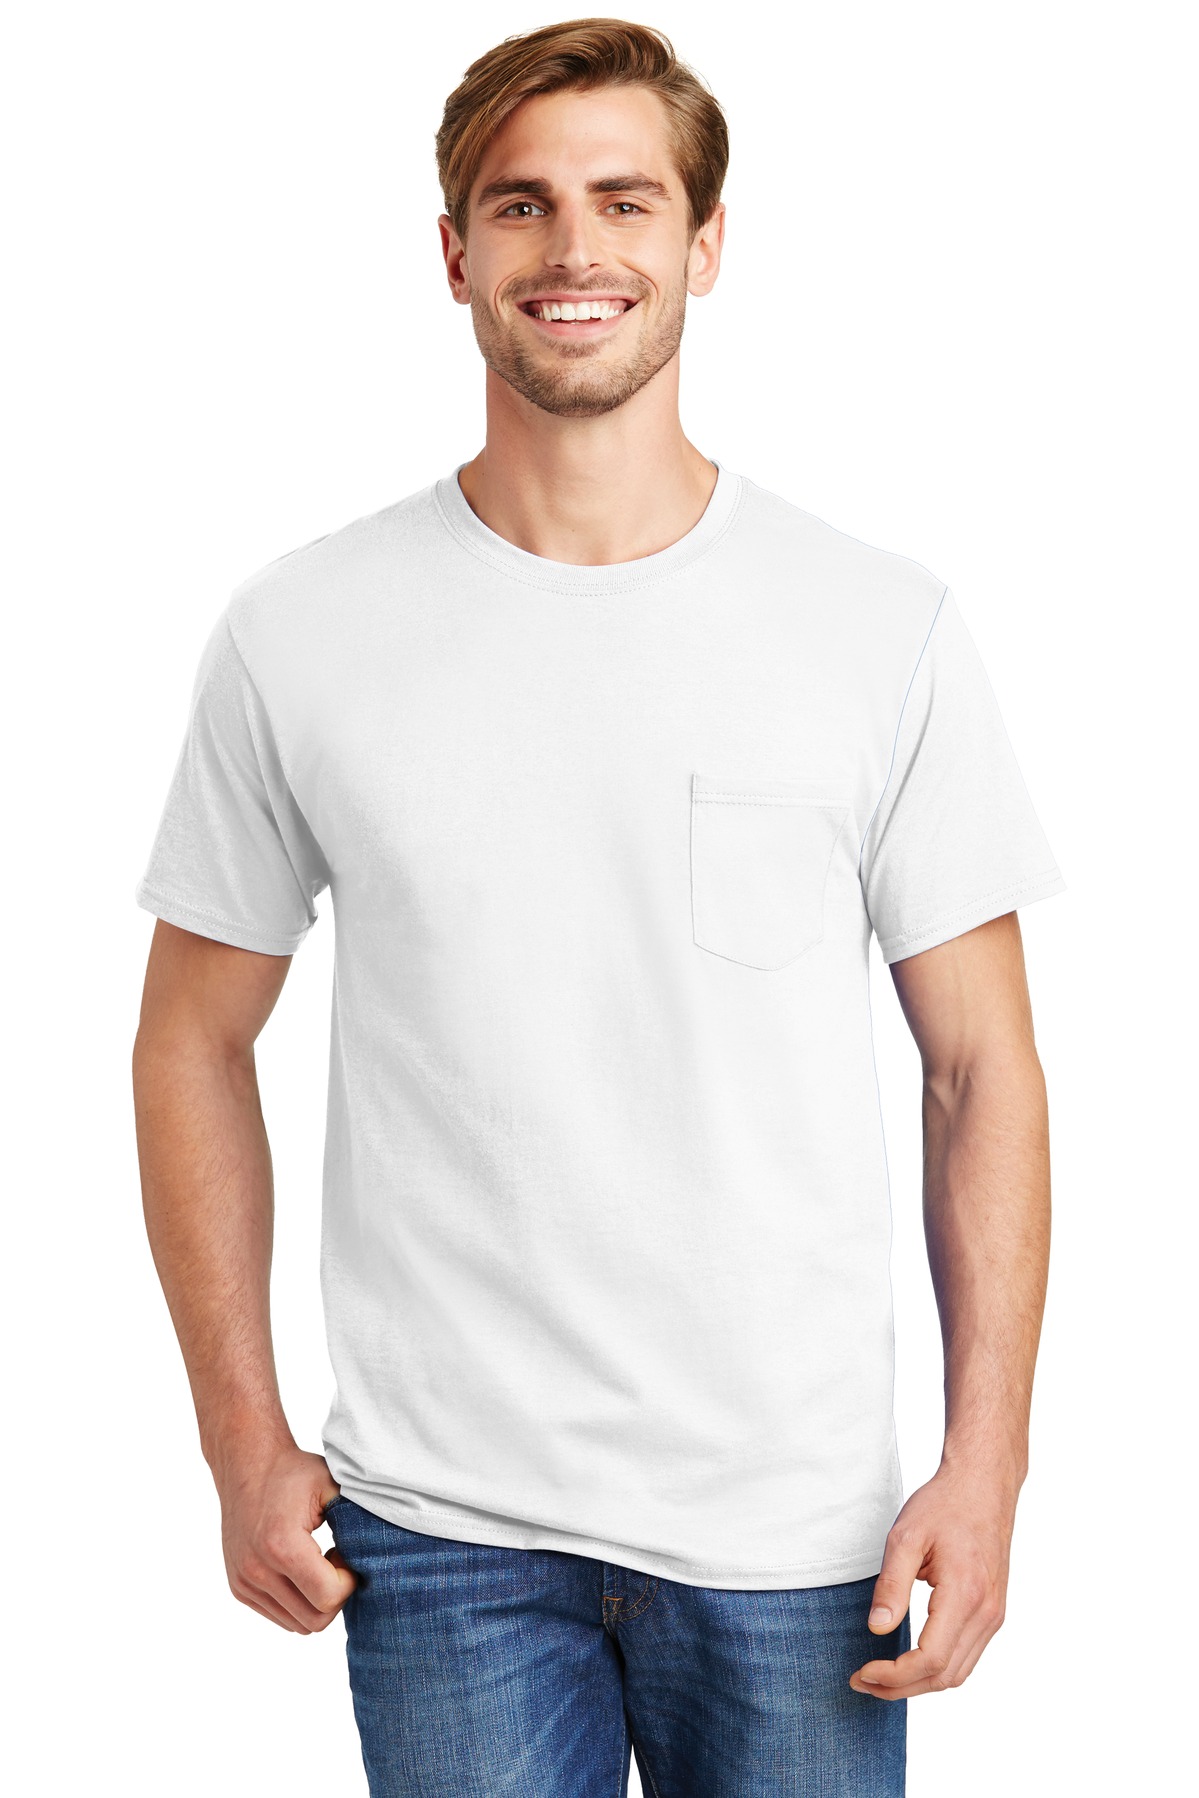 Hanes - Authentic 100% Cotton T-Shirt with Pocket-